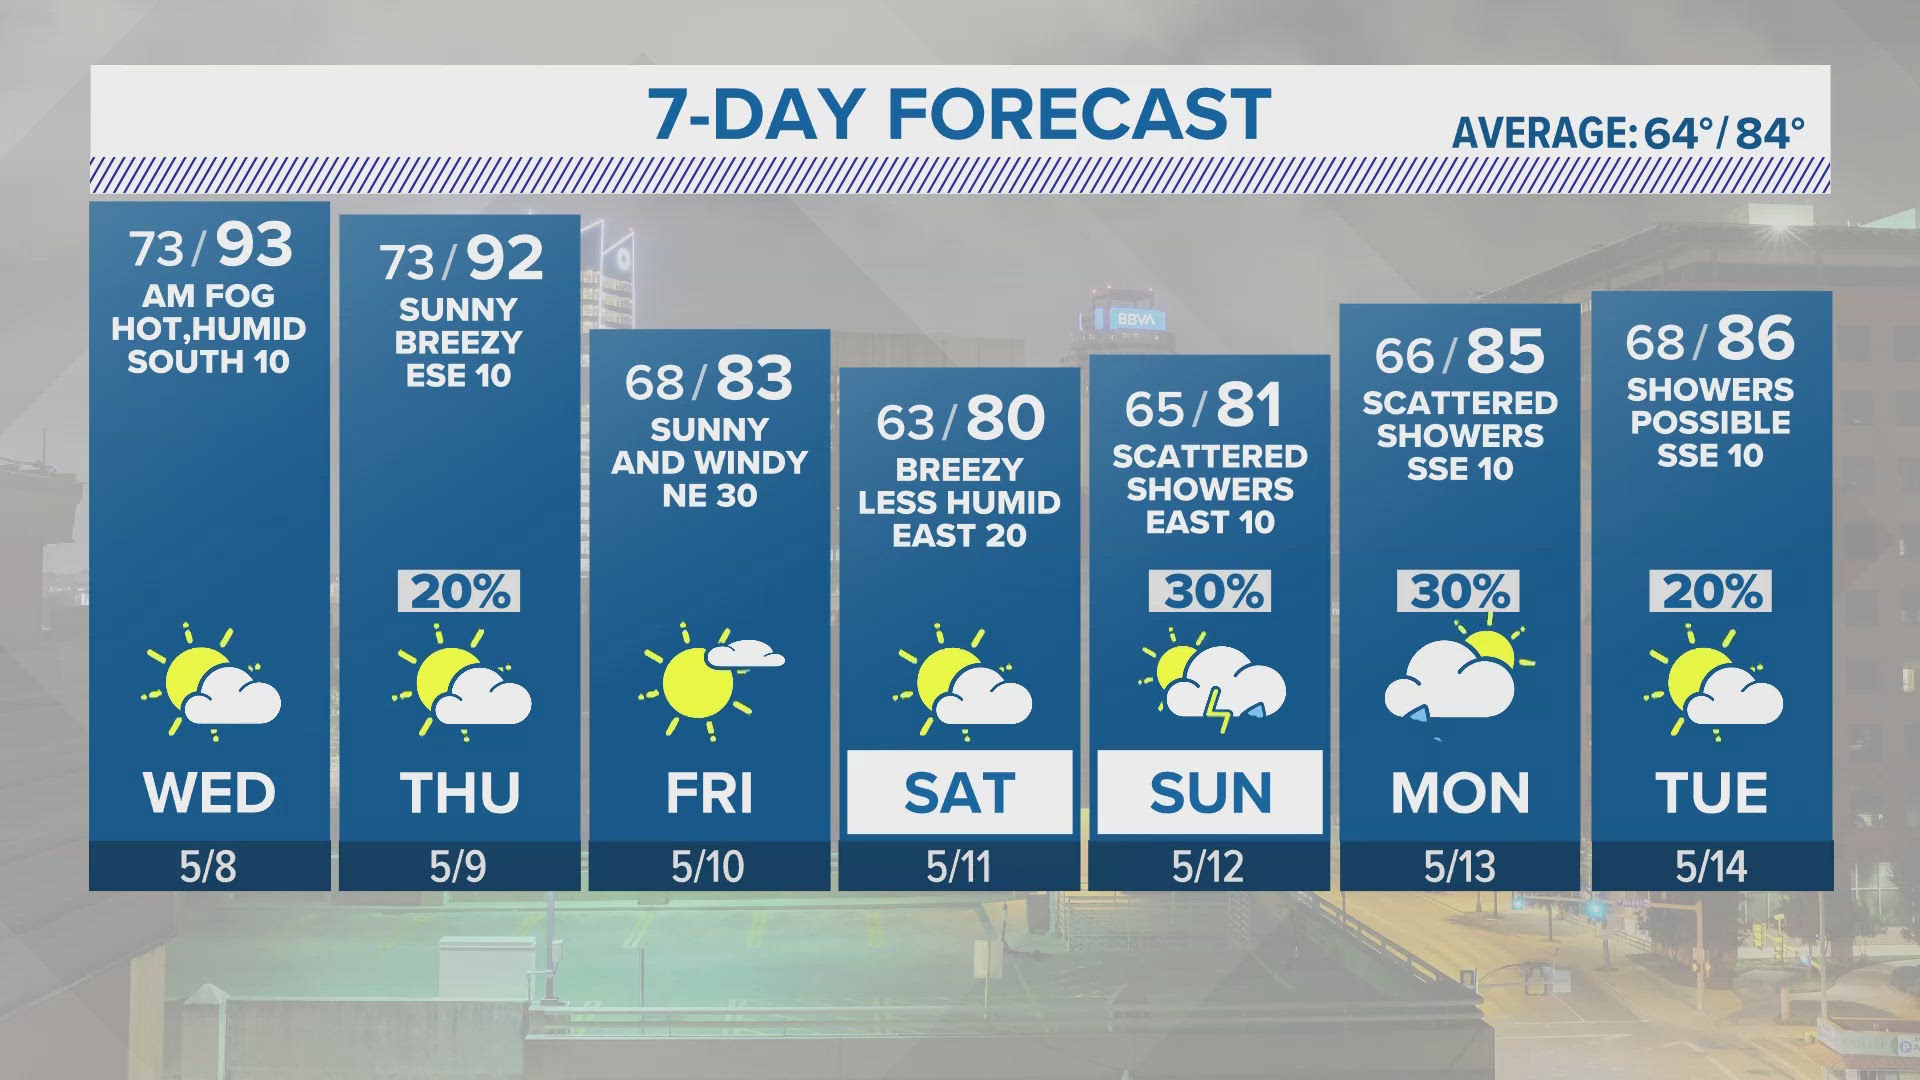 More rain chances are expected to return as we head into the weekend.